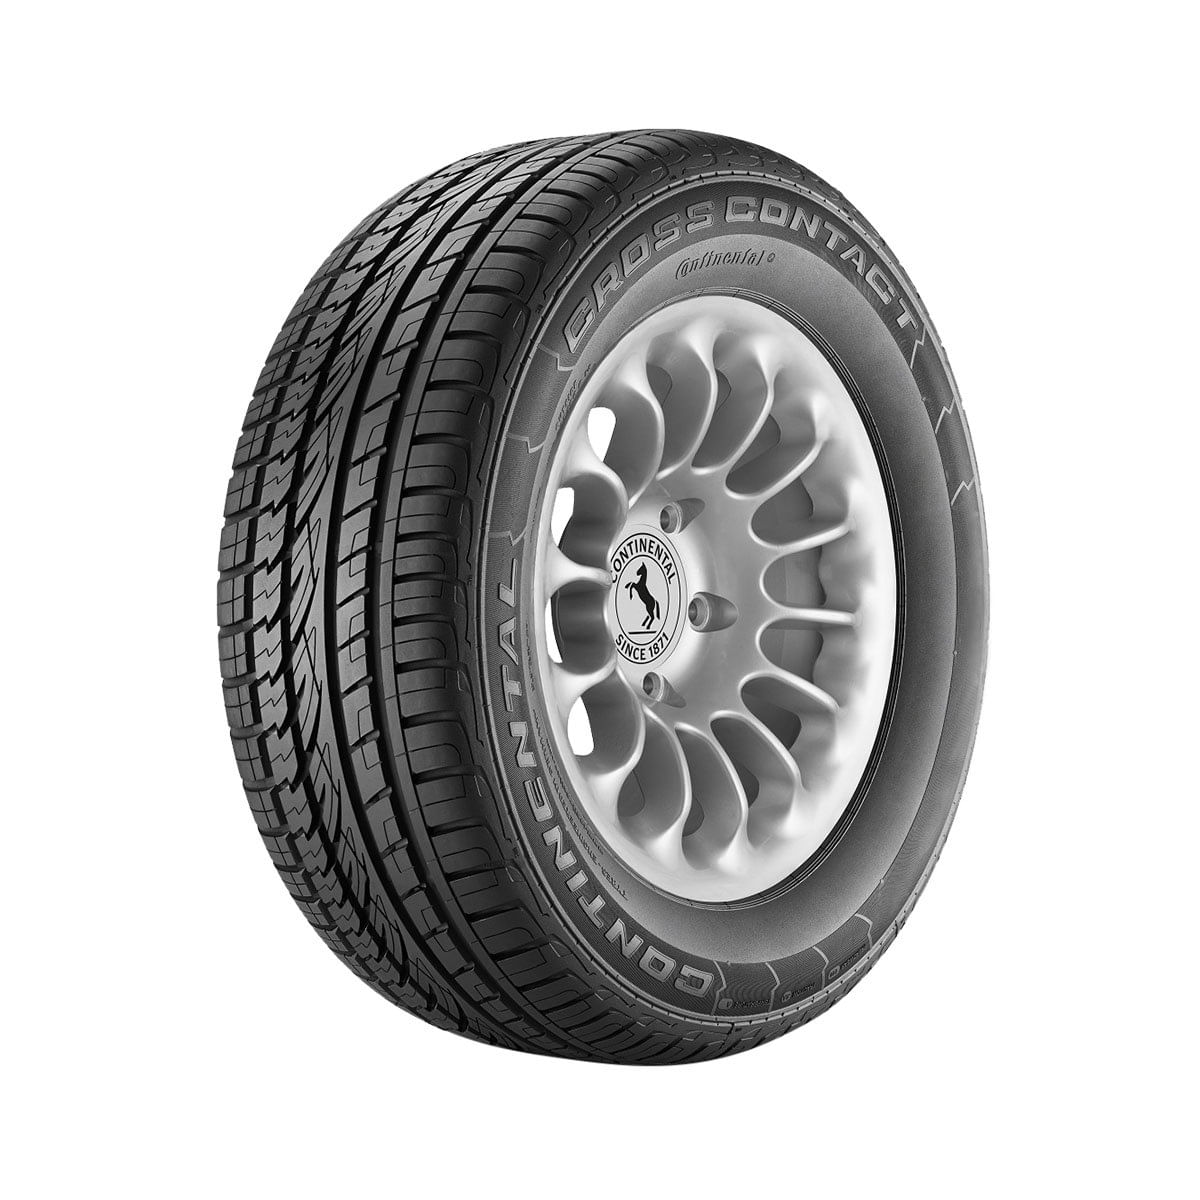 5745071_Pneu Aro 19 255/50 R 19 Continental CrossContact UHP 3548790000_1_Zoom